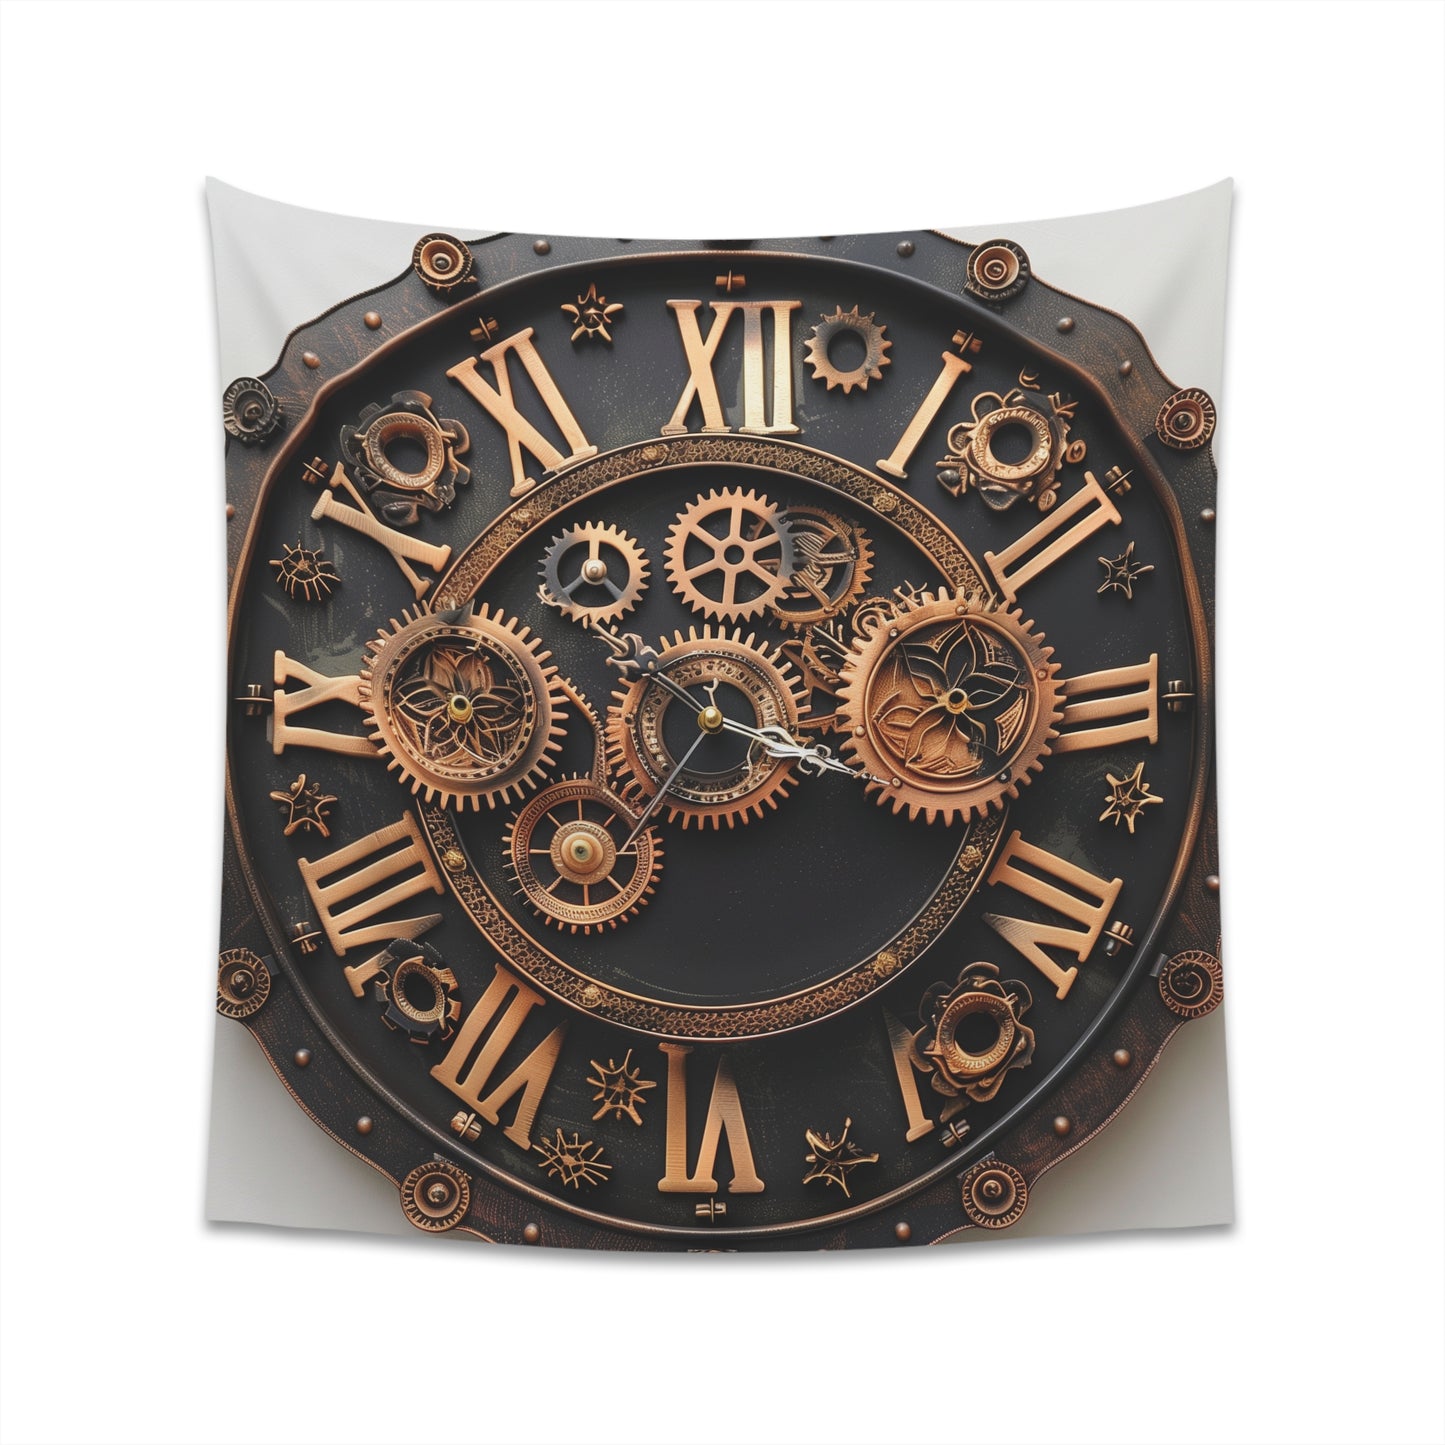 Steampunk Timepiece Clock Tapestry: Intricate Gears and Cogs Design for Industrial Elegance - Perfect Gift Option